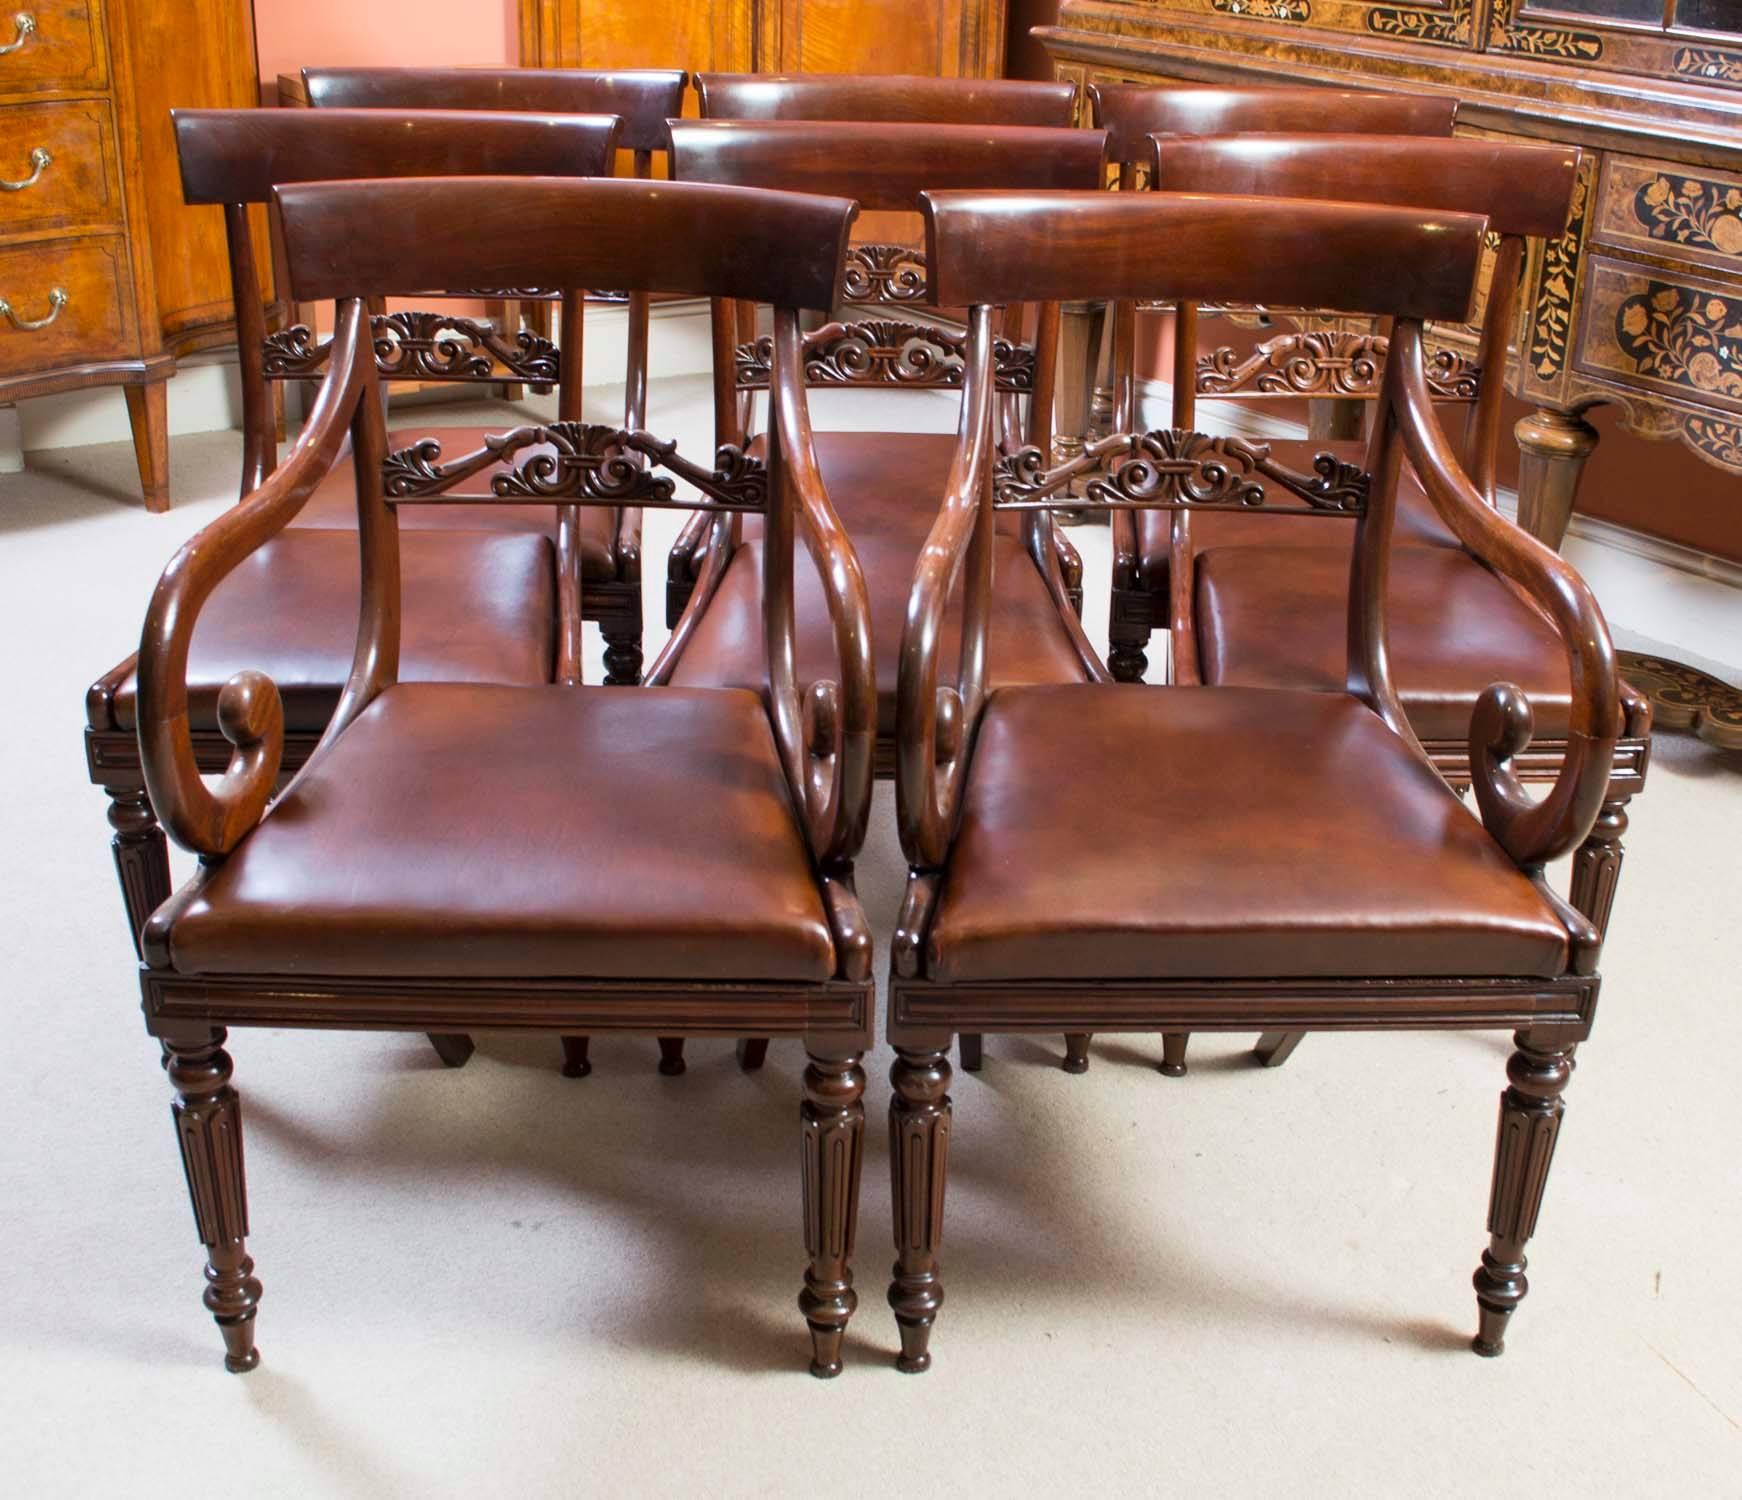 Antique Regency Gillows Dining Table Eight Regency Chairs 1